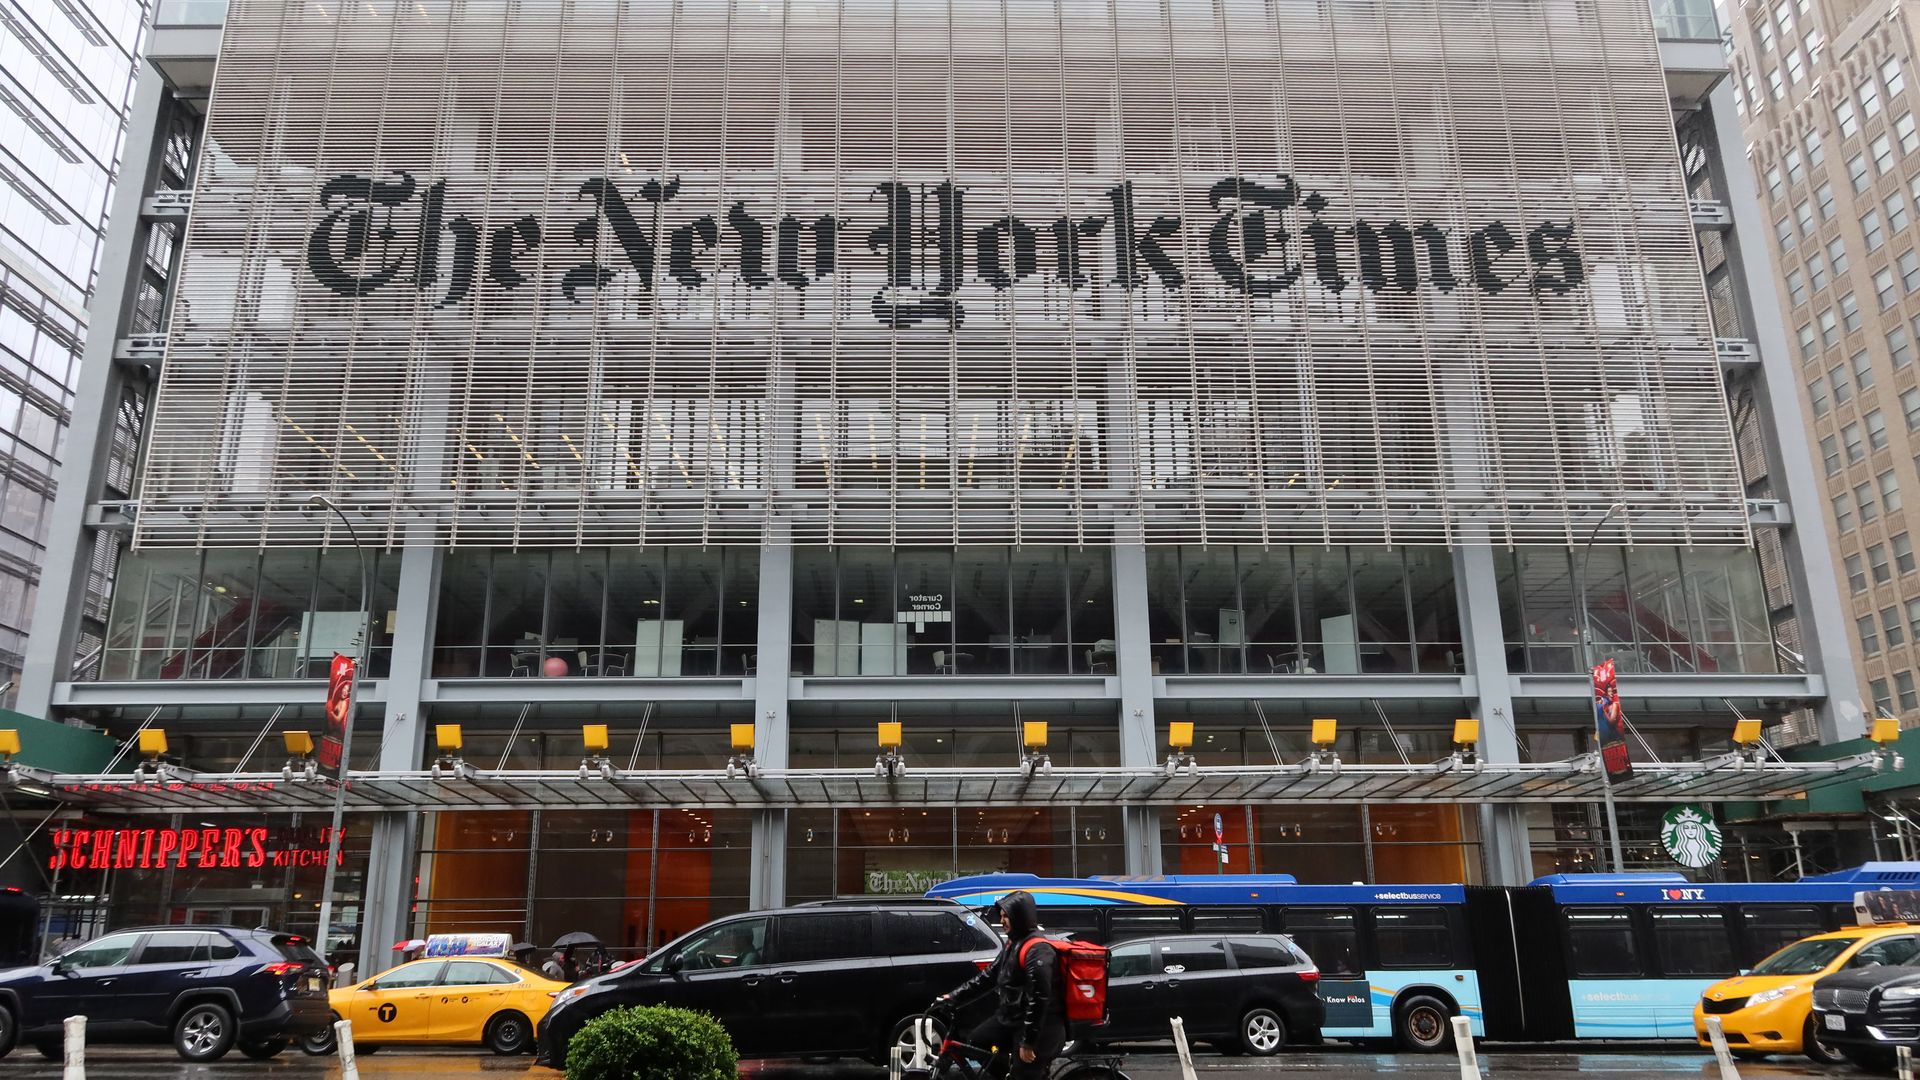 When The Times Didn't Print on Sundays - The New York Times